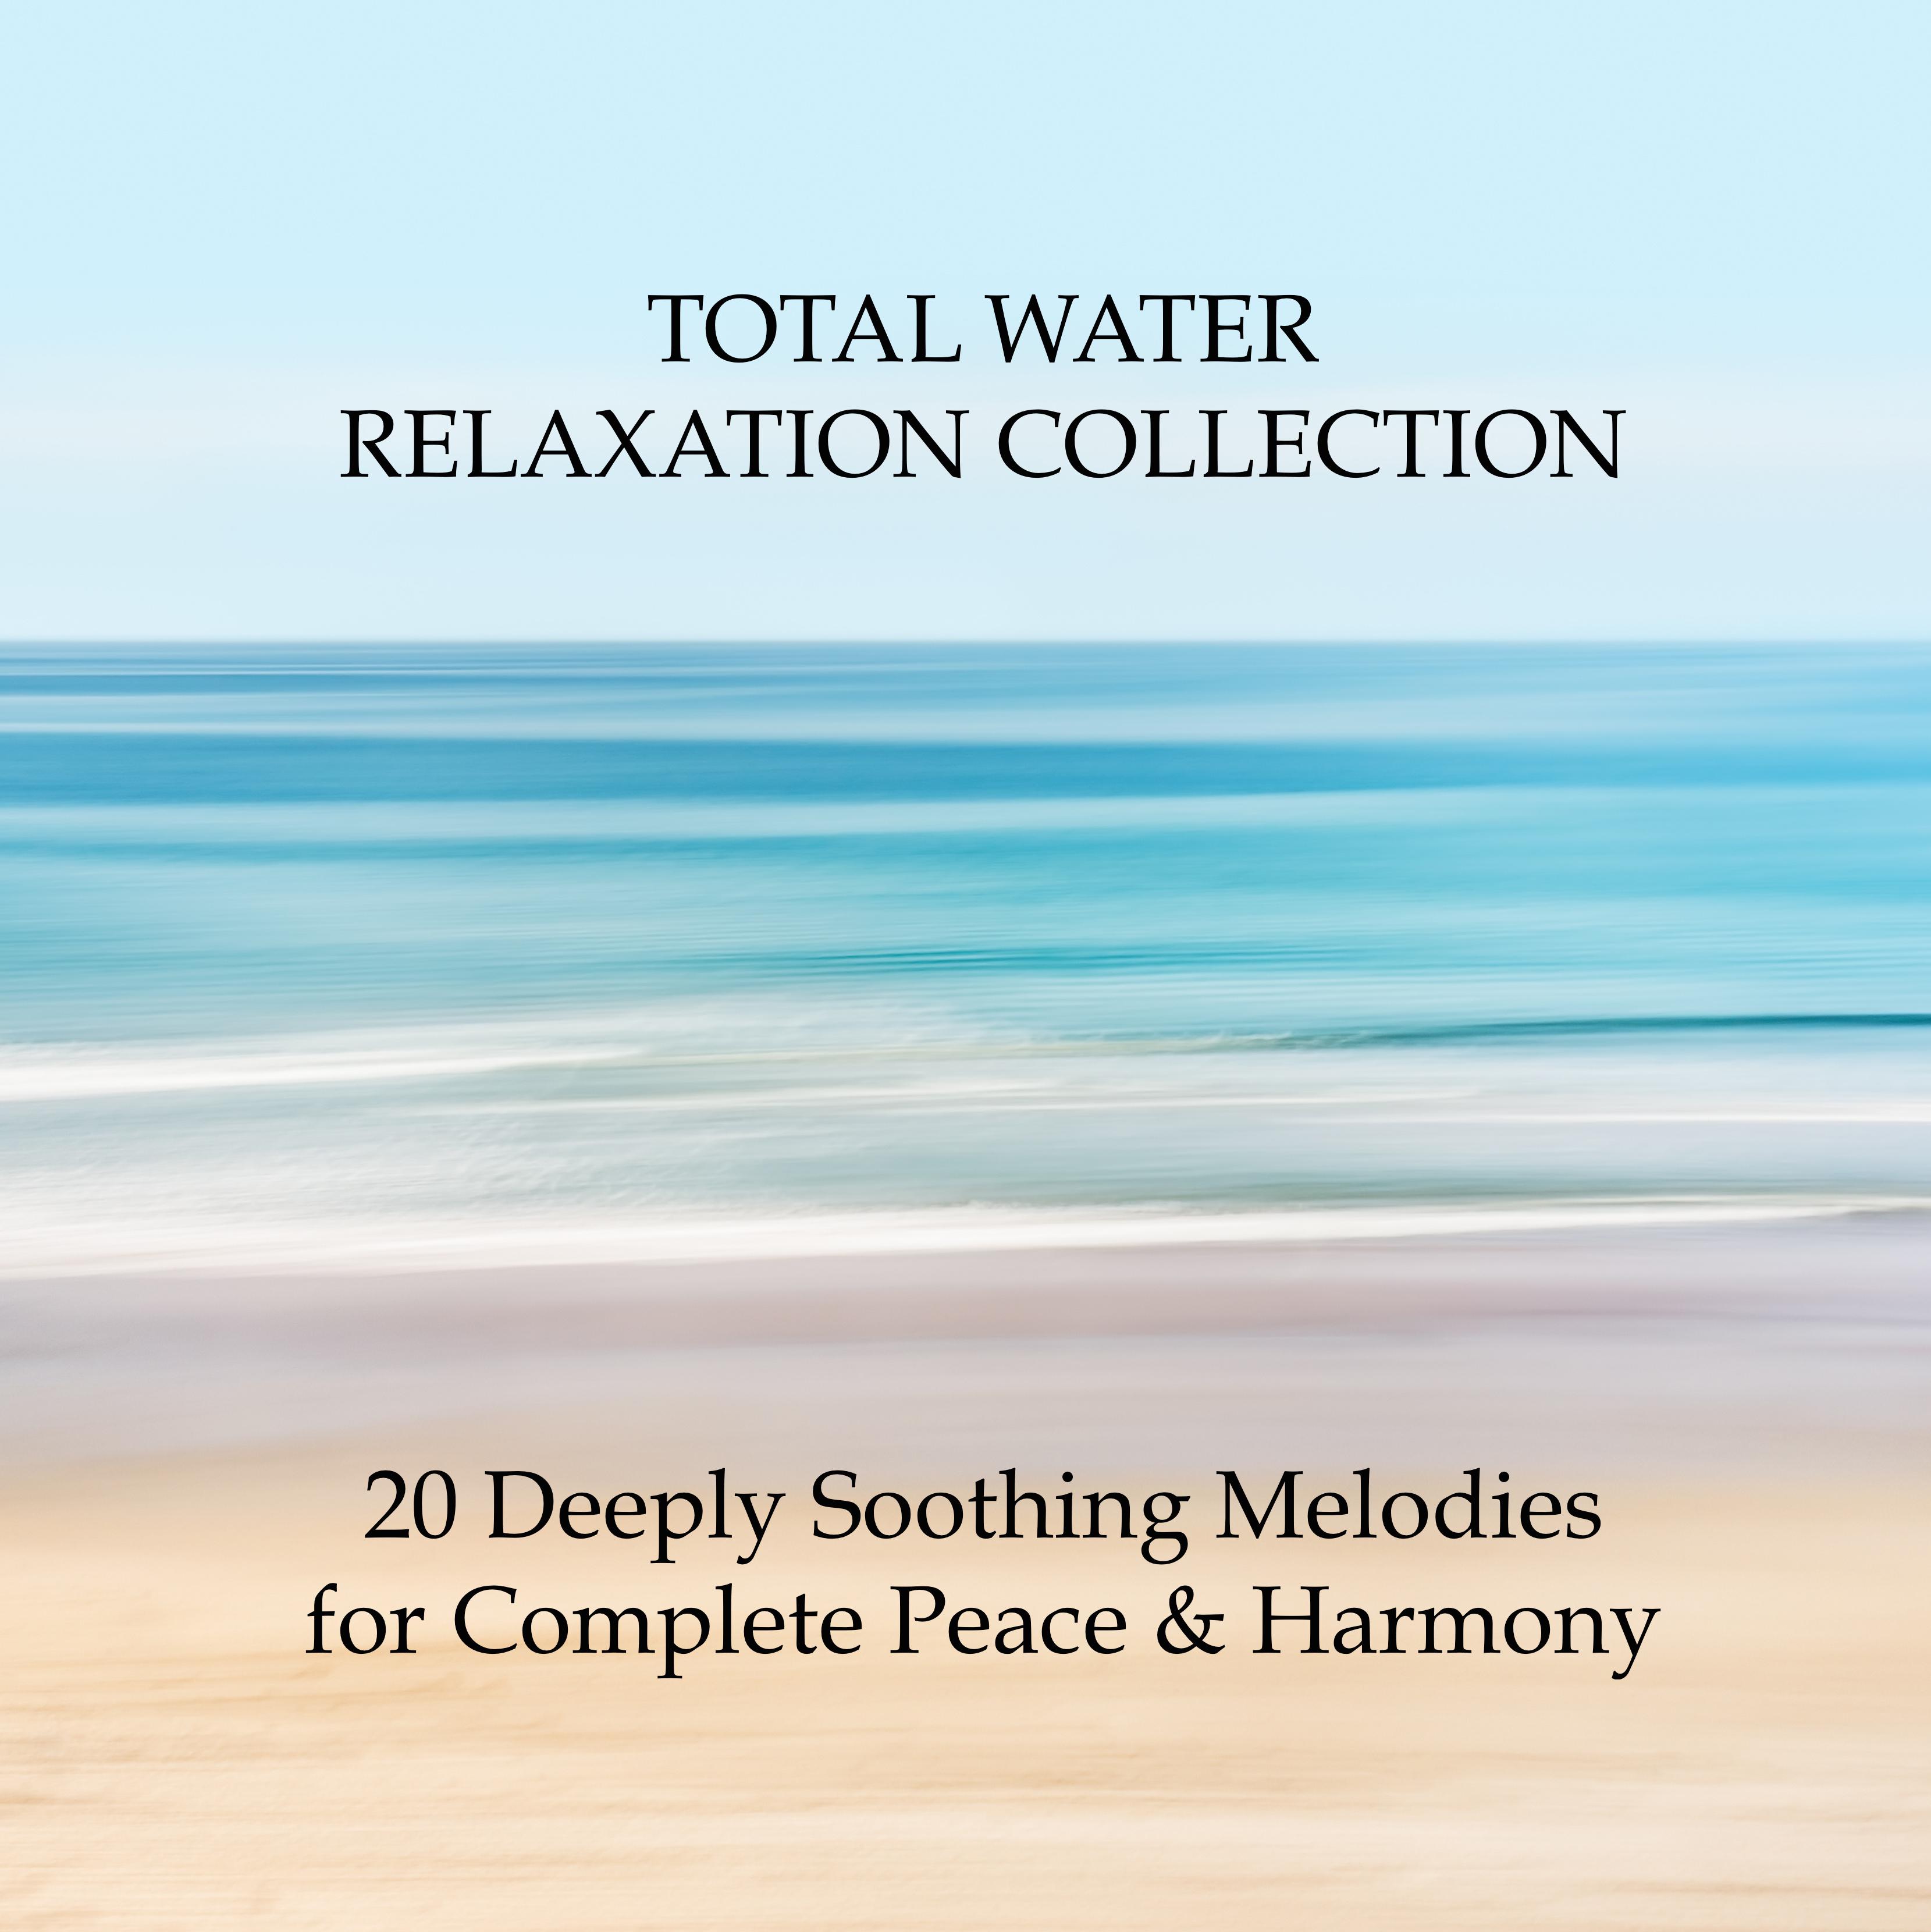 Total Water Relaxation Collection - 20 Deeply Soothing Melodies for Complete Peace & Harmony